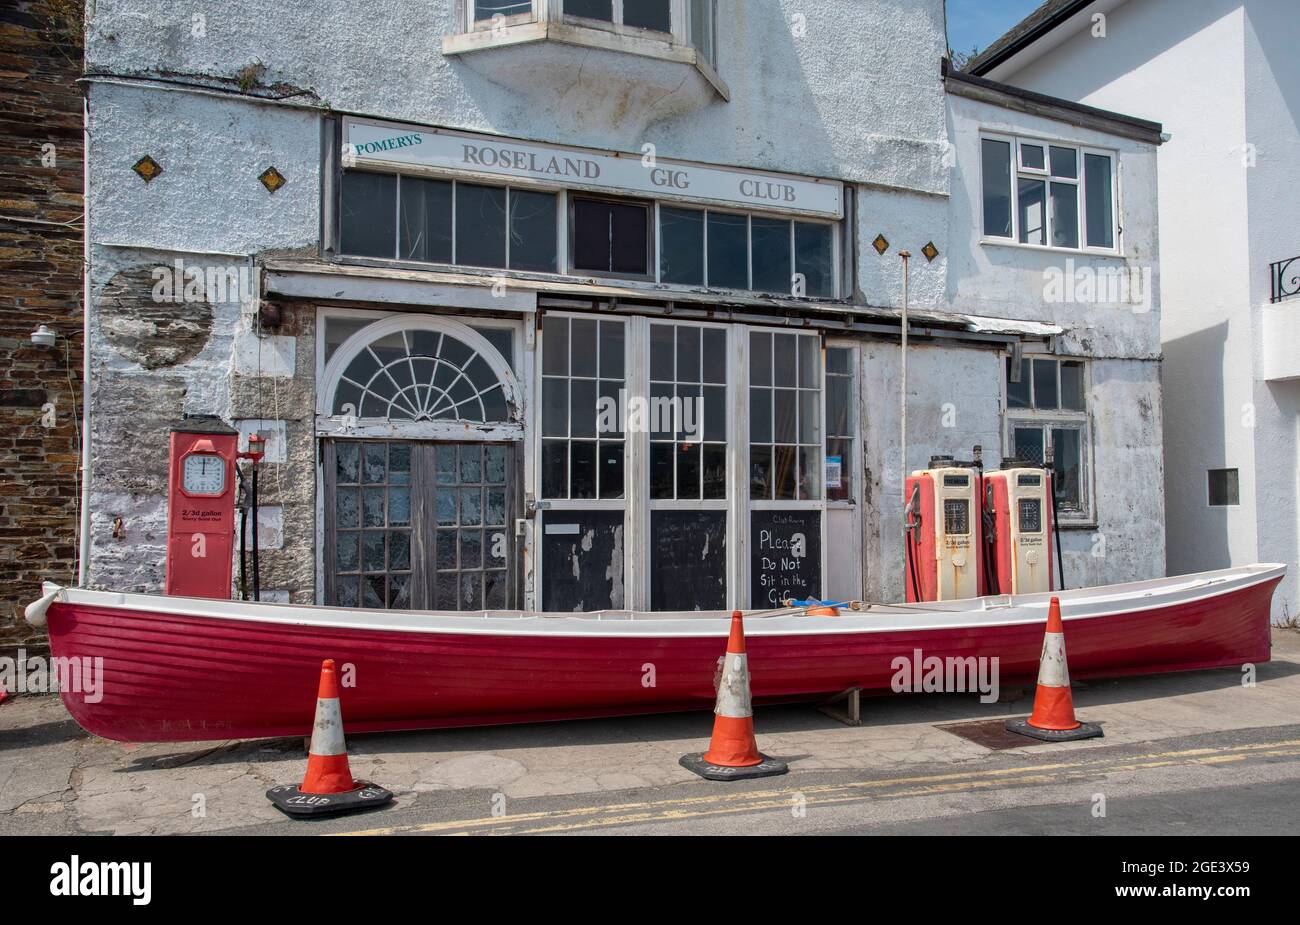 St Mawes, Cornwall, England, UK. A red and white painted gig stands outside the Roseland Gig Club formerly the Pomerys garage on the harbour front in Stock Photo